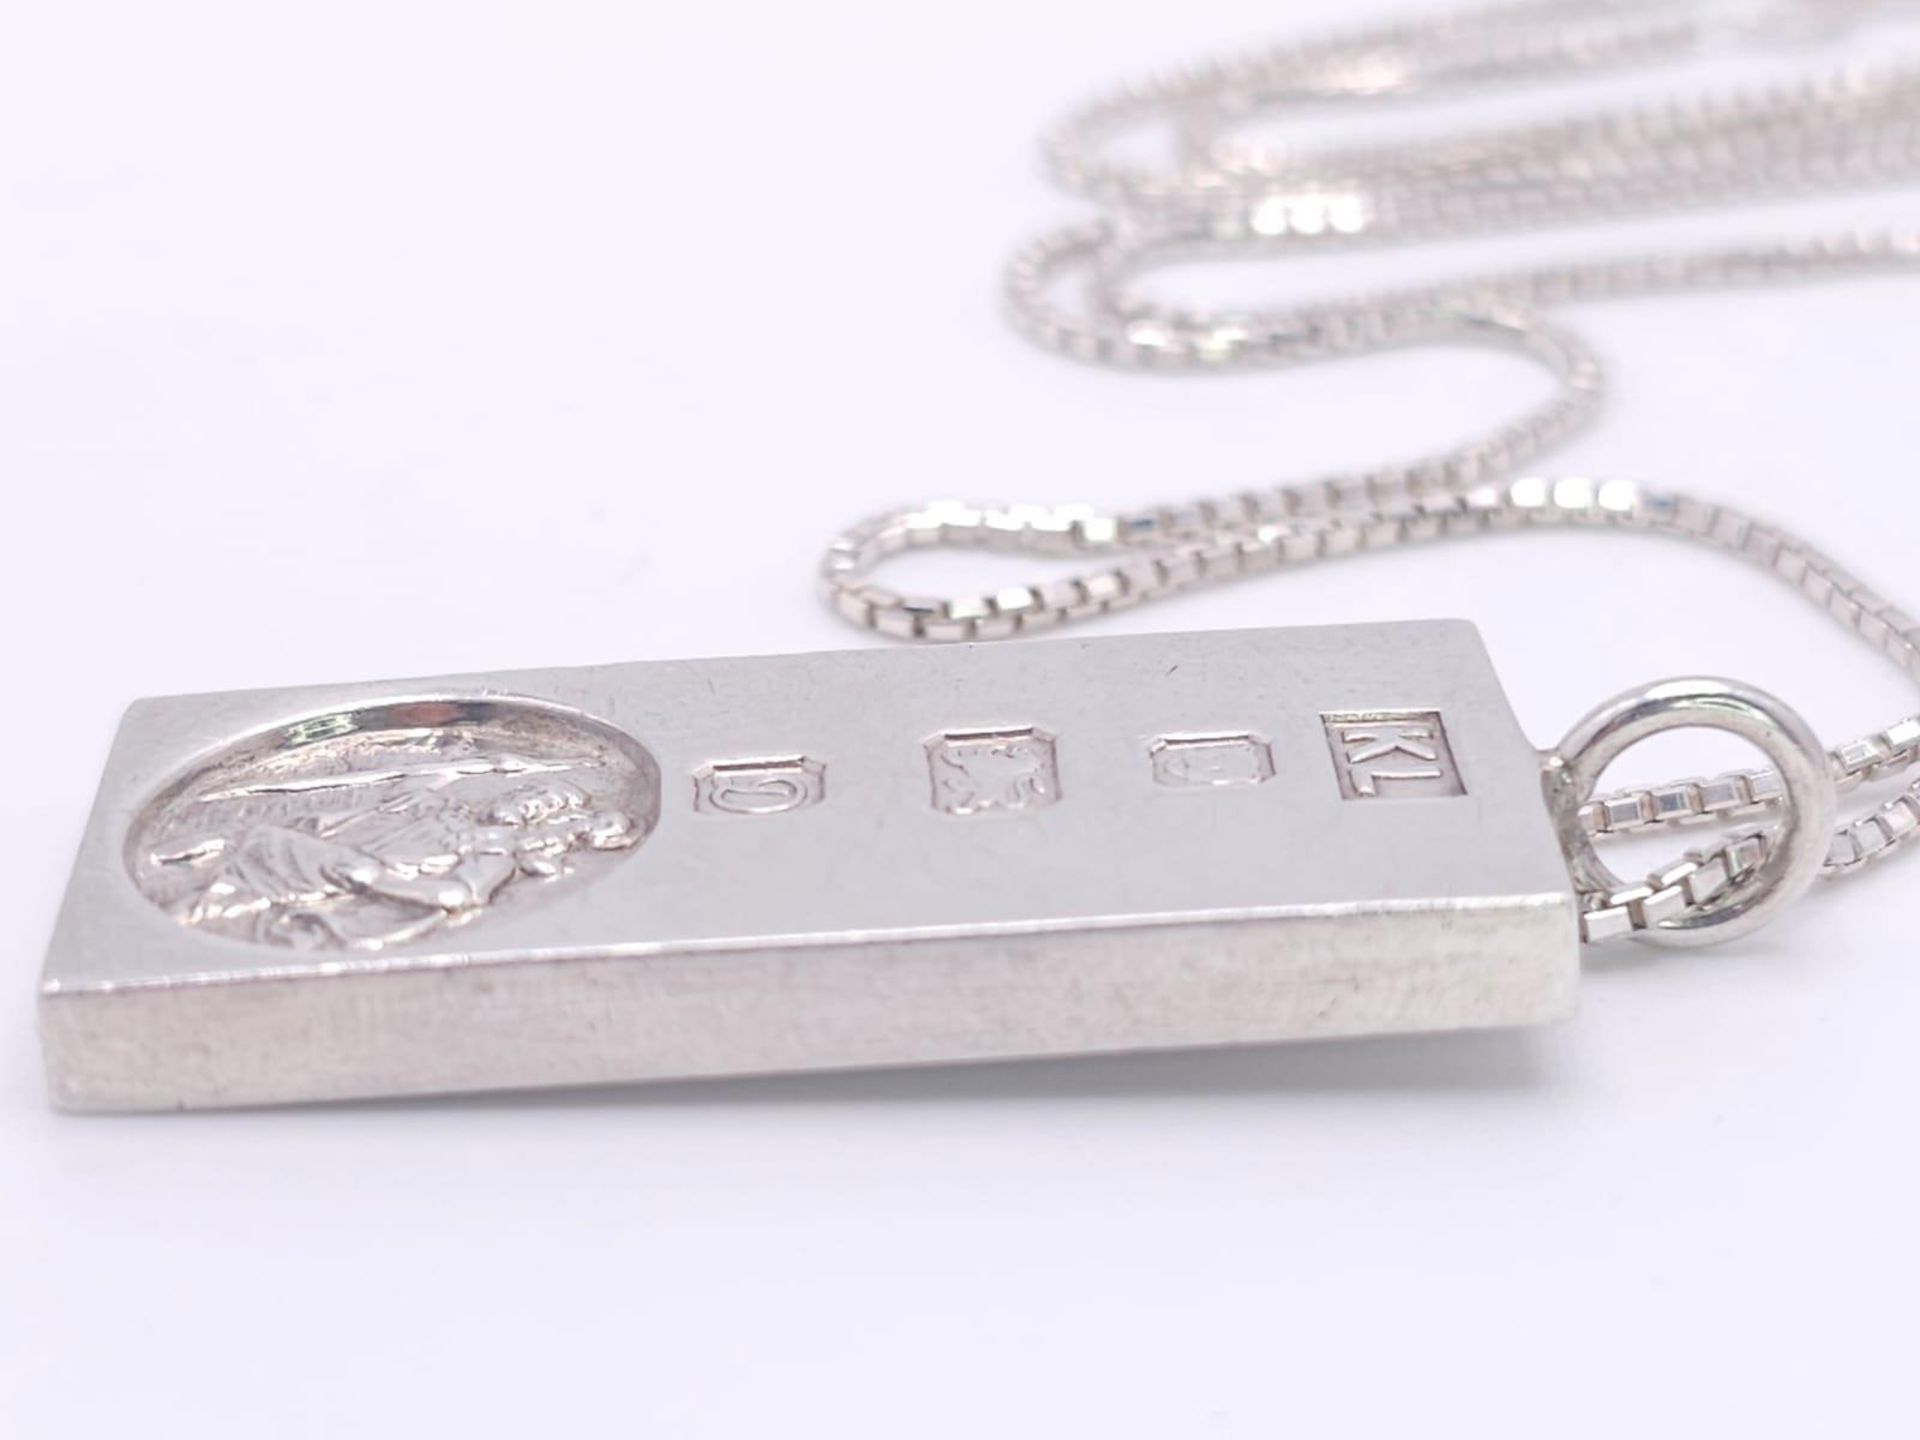 A Sterling Silver St. Christopher Ingot Pendant on a Silver Necklace. 5cm - pendant. 58cm necklace - Image 6 of 13